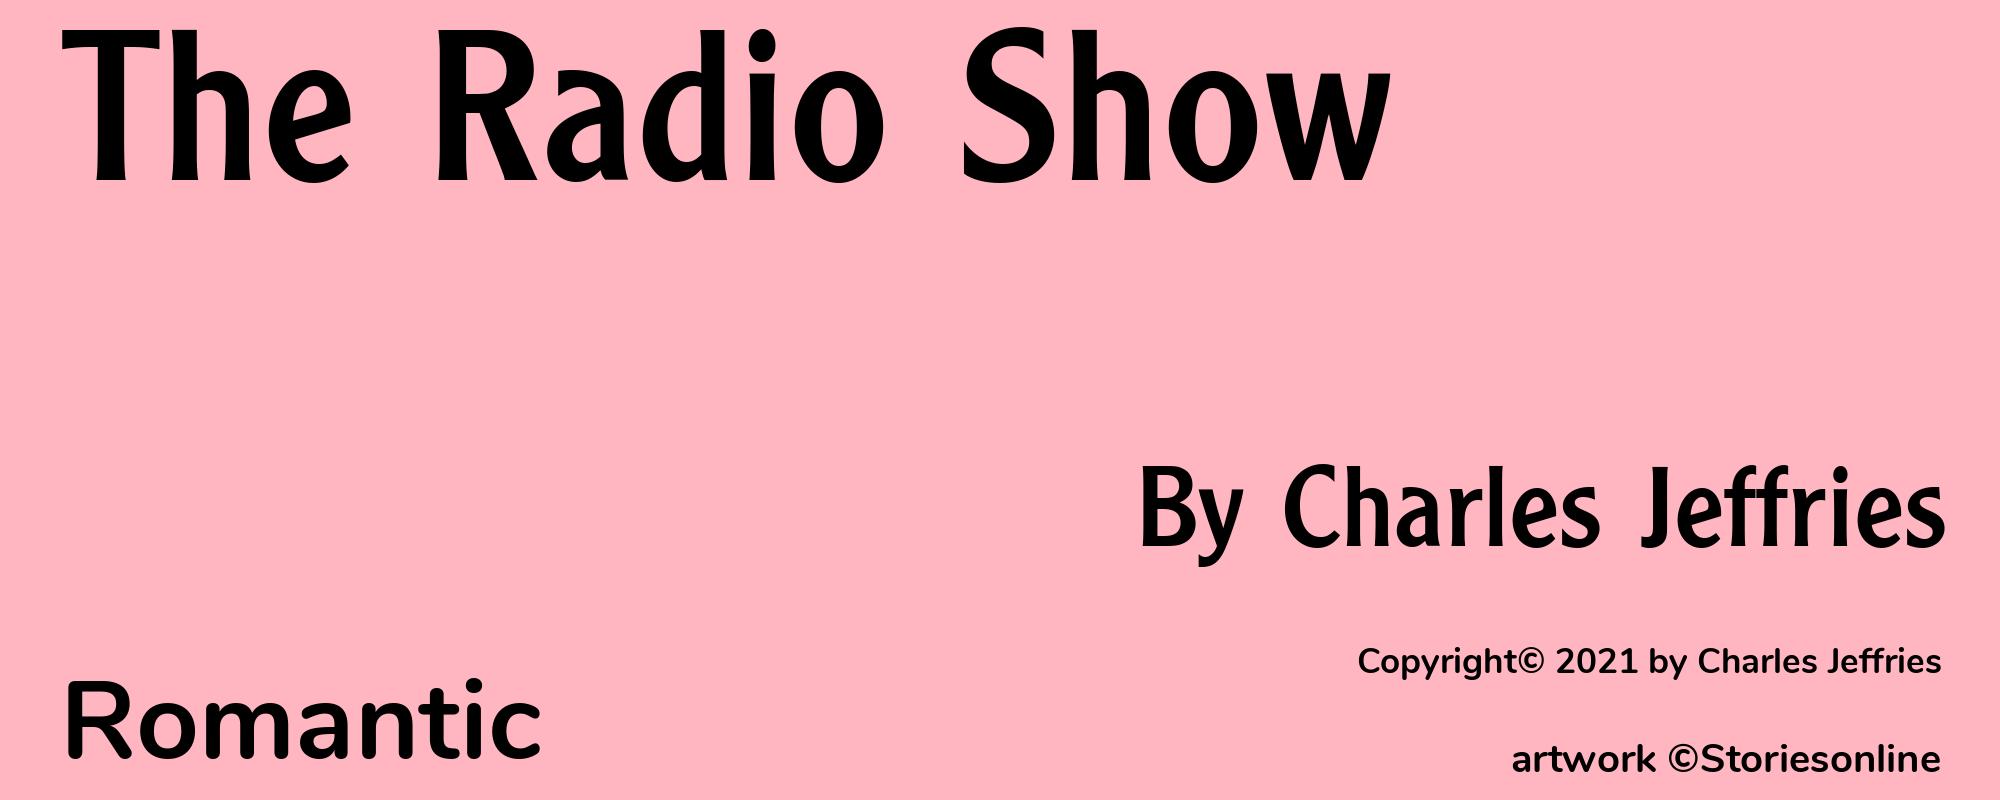 The Radio Show - Cover